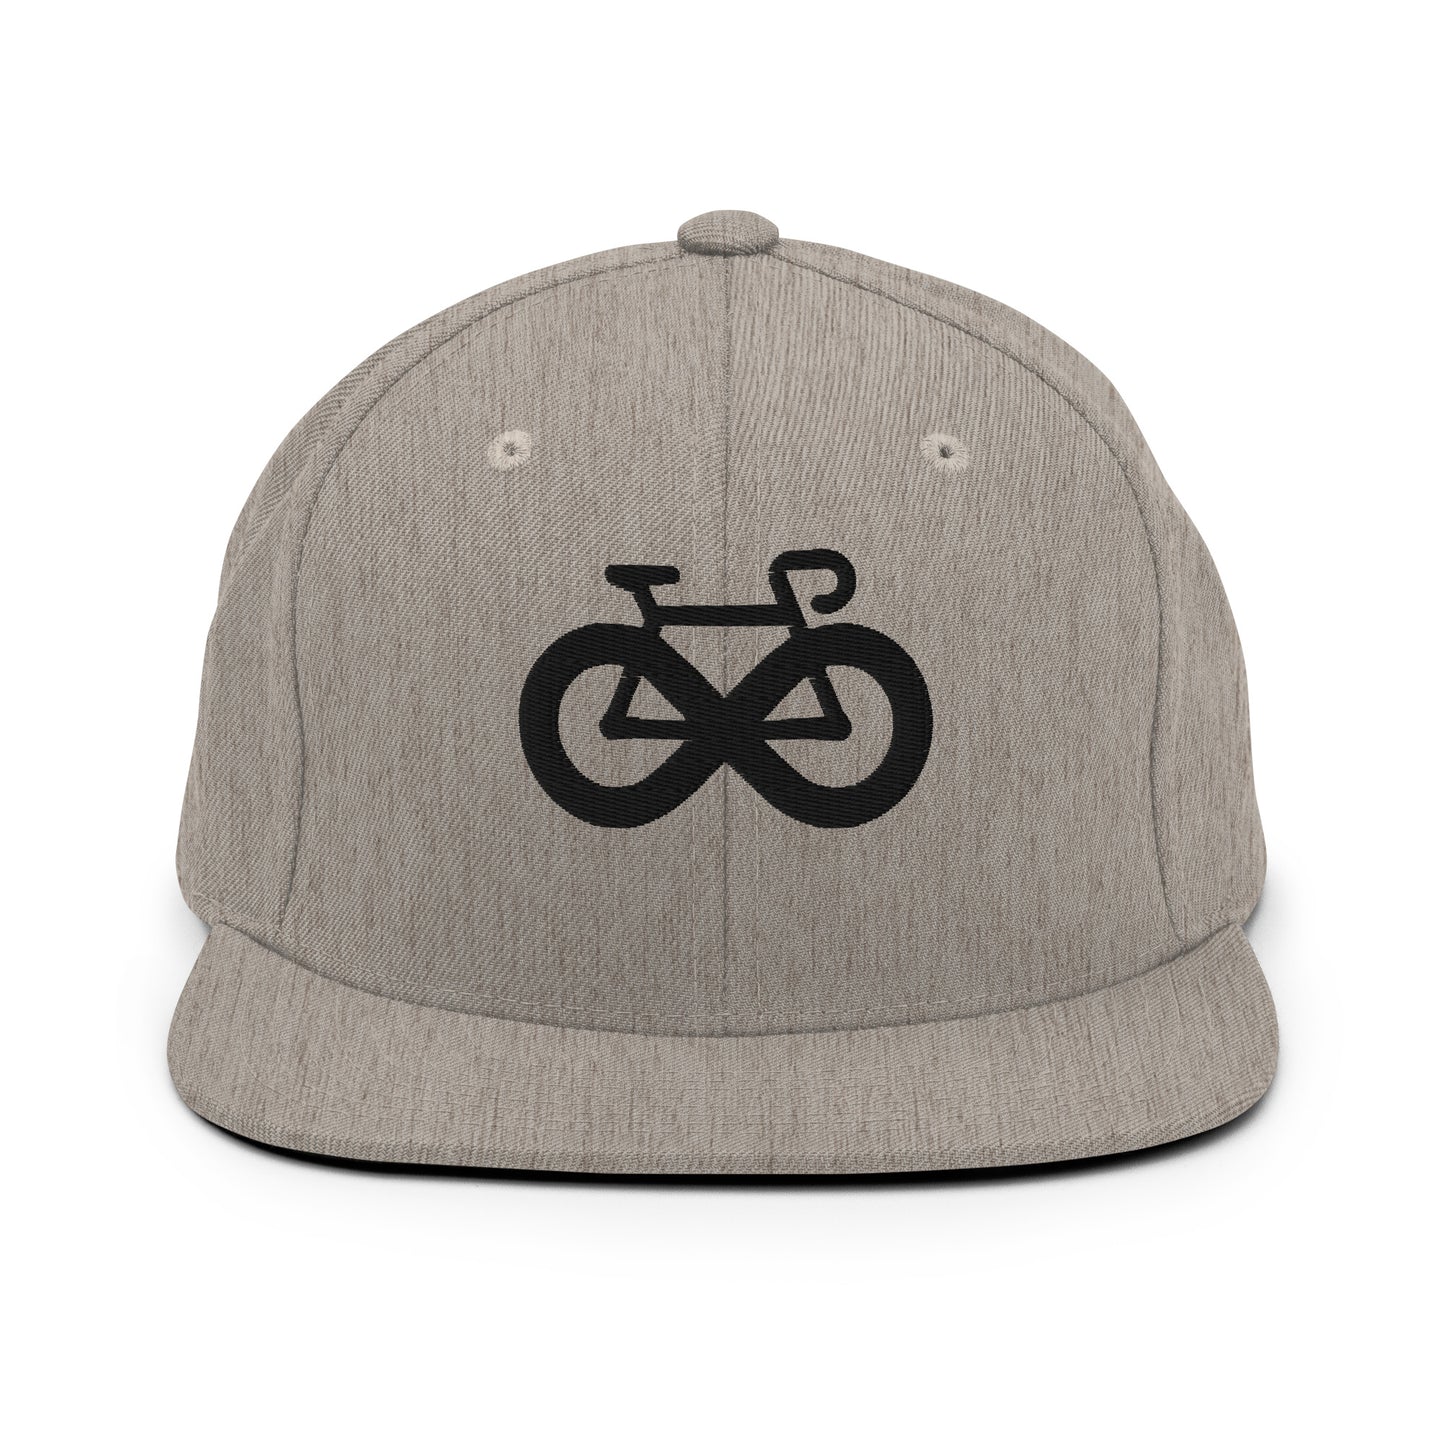 Infinity Bike 3D Puff Embroidered Snapback Hat